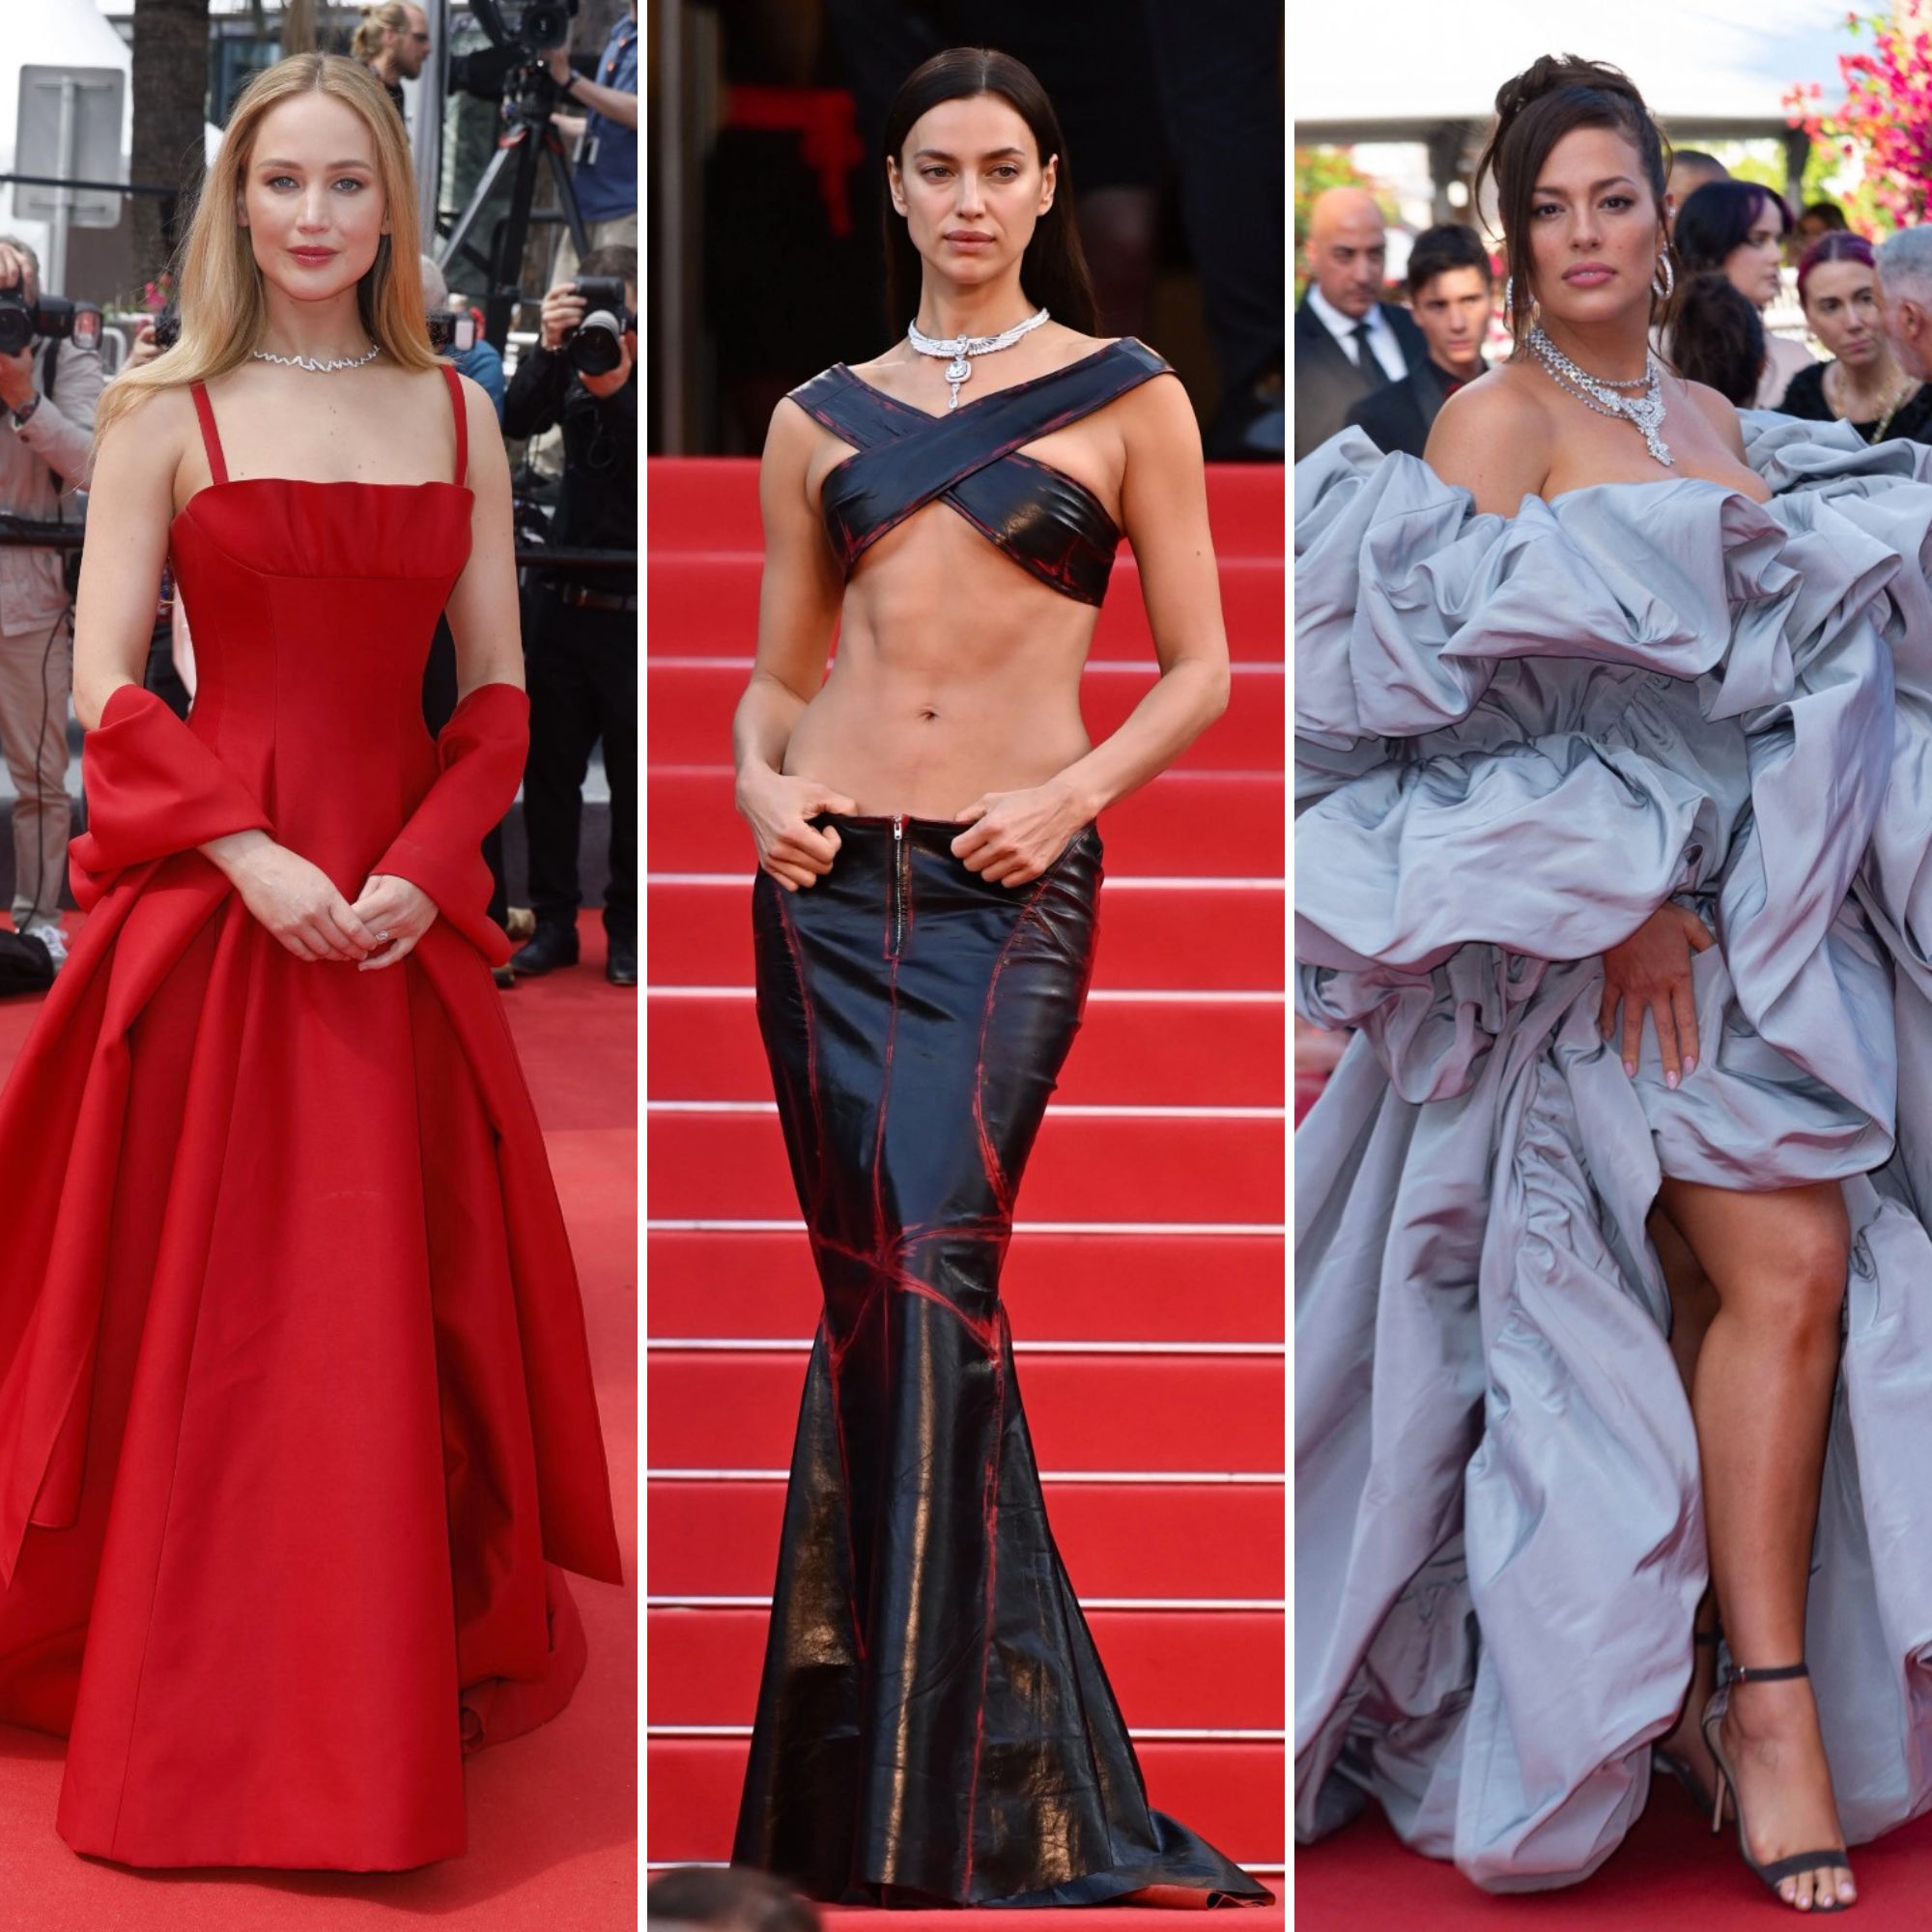 Stars With Iconic Wardrobe Malfunctions: Fashion's Memorable Flashing  Accidents in Photos